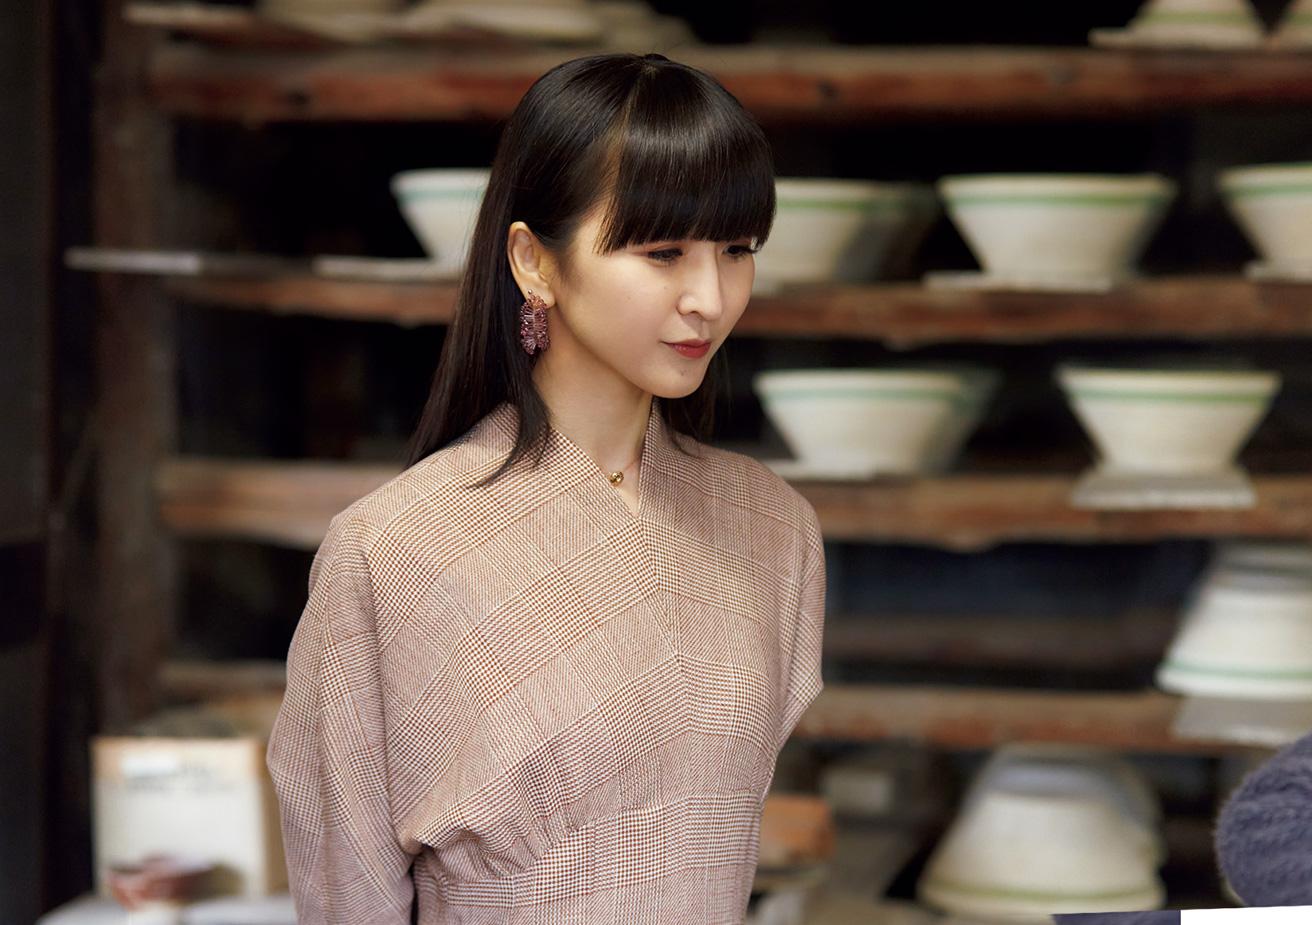 “The waves combed one by one into the pattern are so beautiful,” exclaimed our shopkeeper KASHIYUKA.